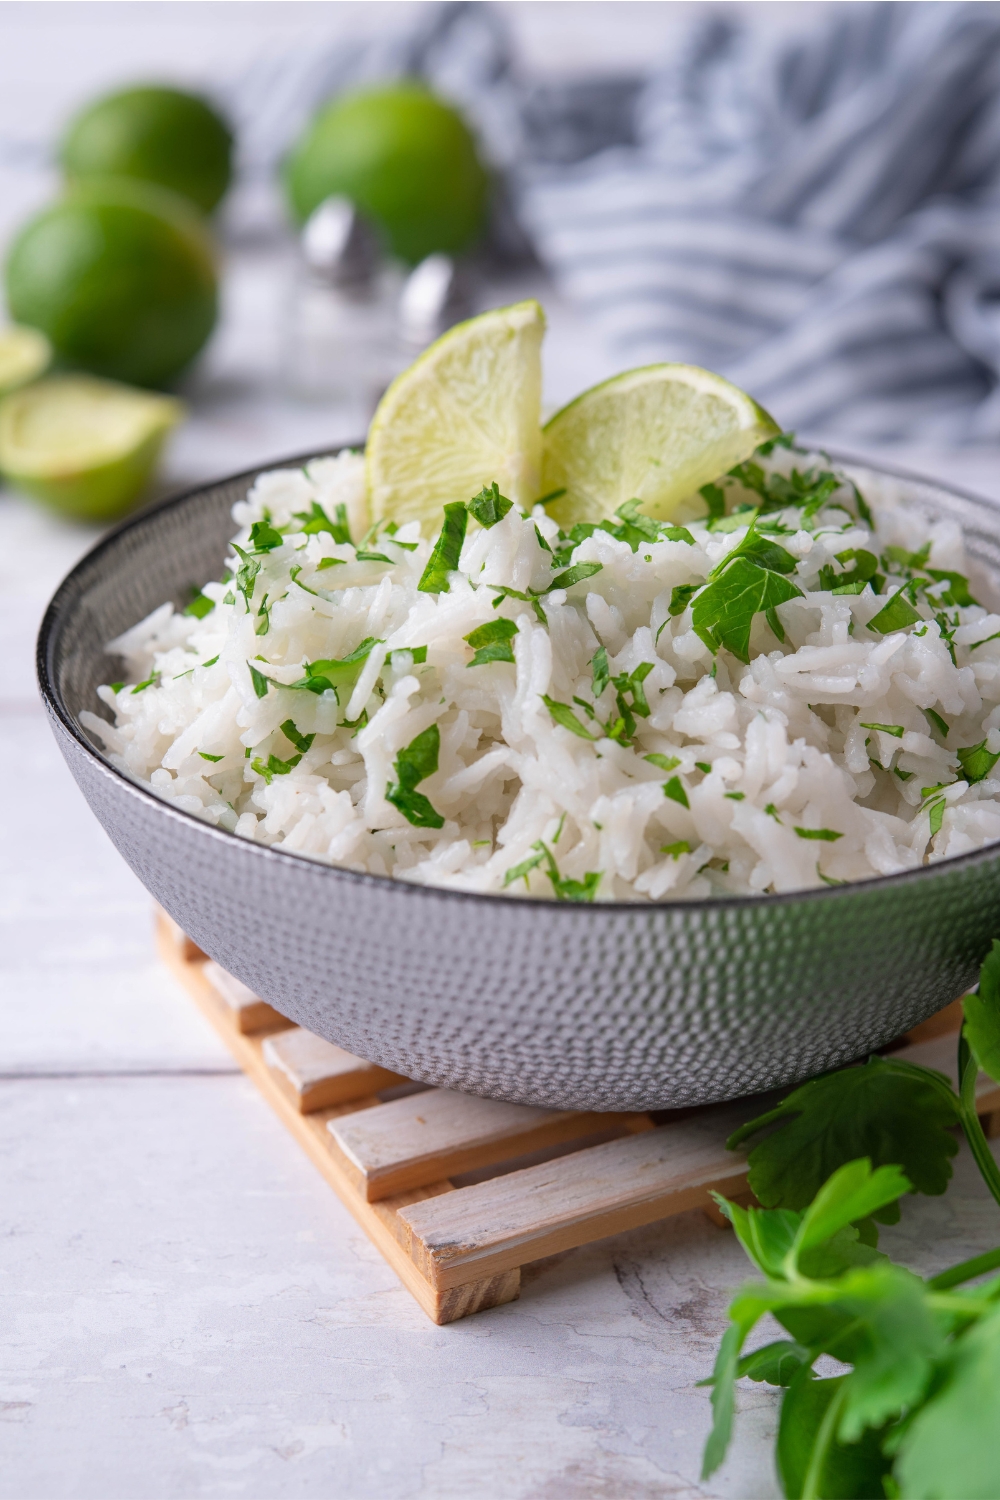 Two limes and chopped cilantro on top of white rice that is in a bowl.